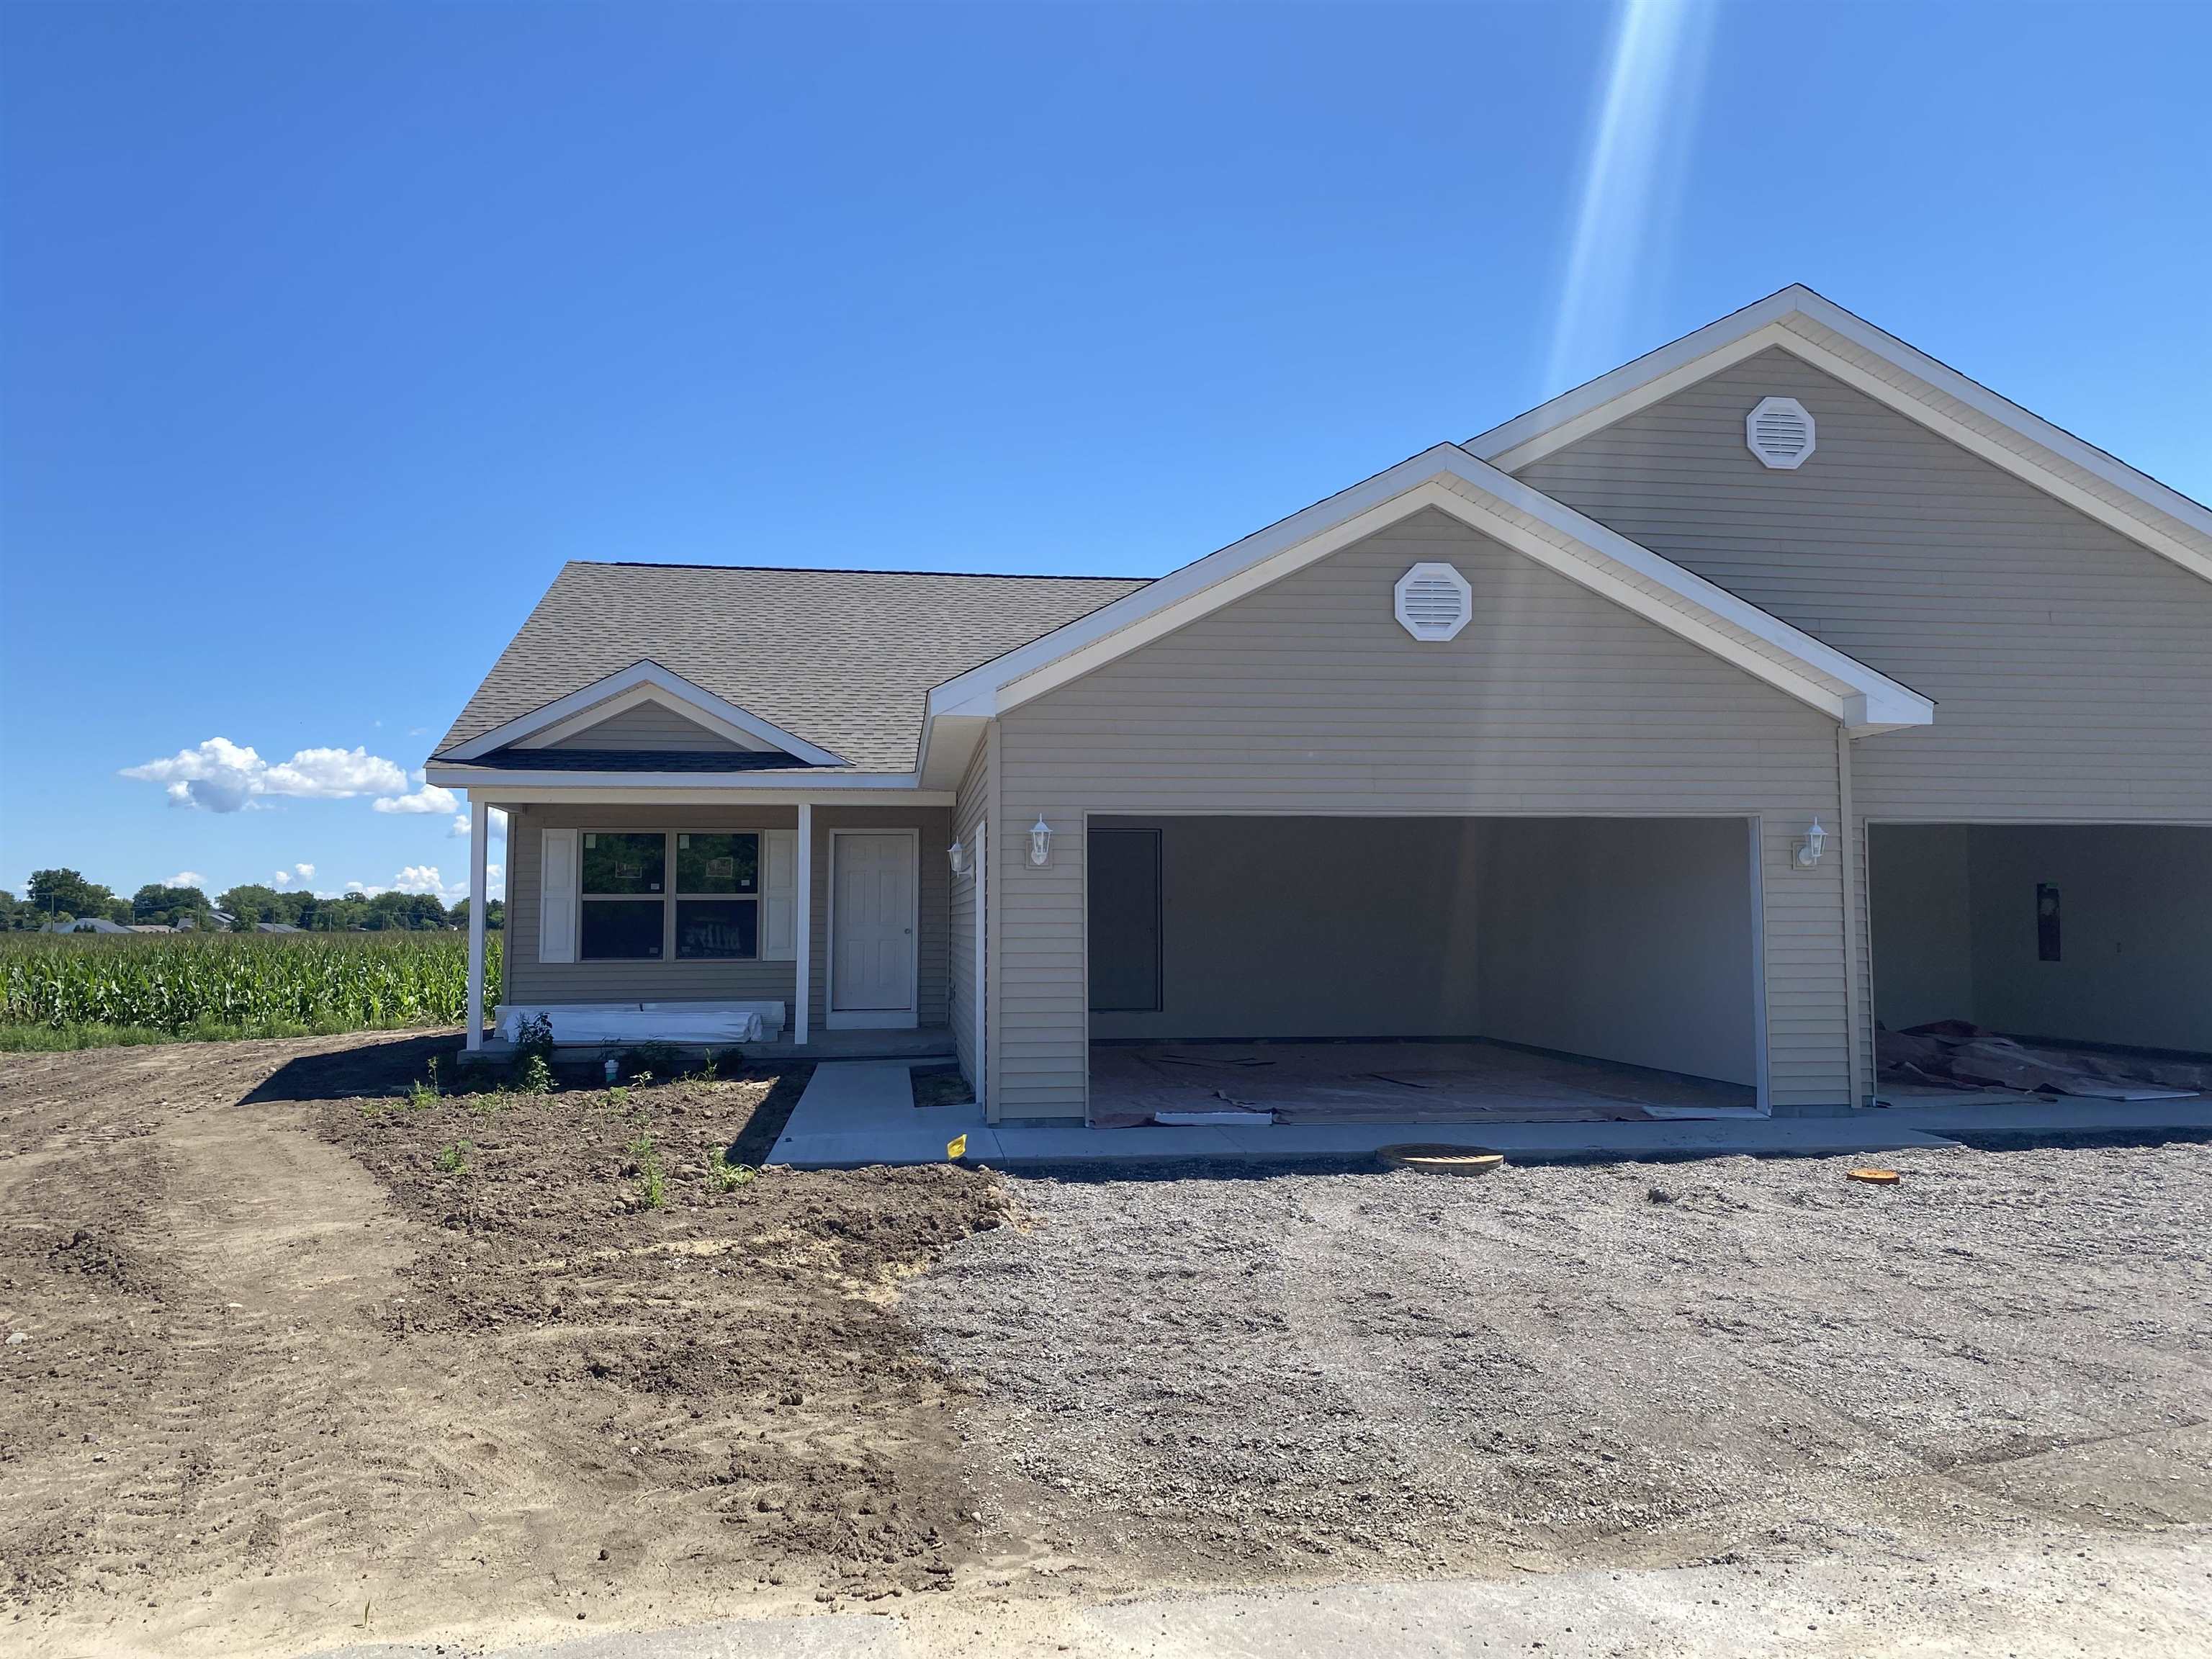 Beautiful brand new condo in ever popular Auburn MI. This Lovely two bedroom, 2 bath duplex condo will be ready soon to call your own.  With an accepted Purchase agreement, you still have time to make any up grades to the home, and choose your own finishes.